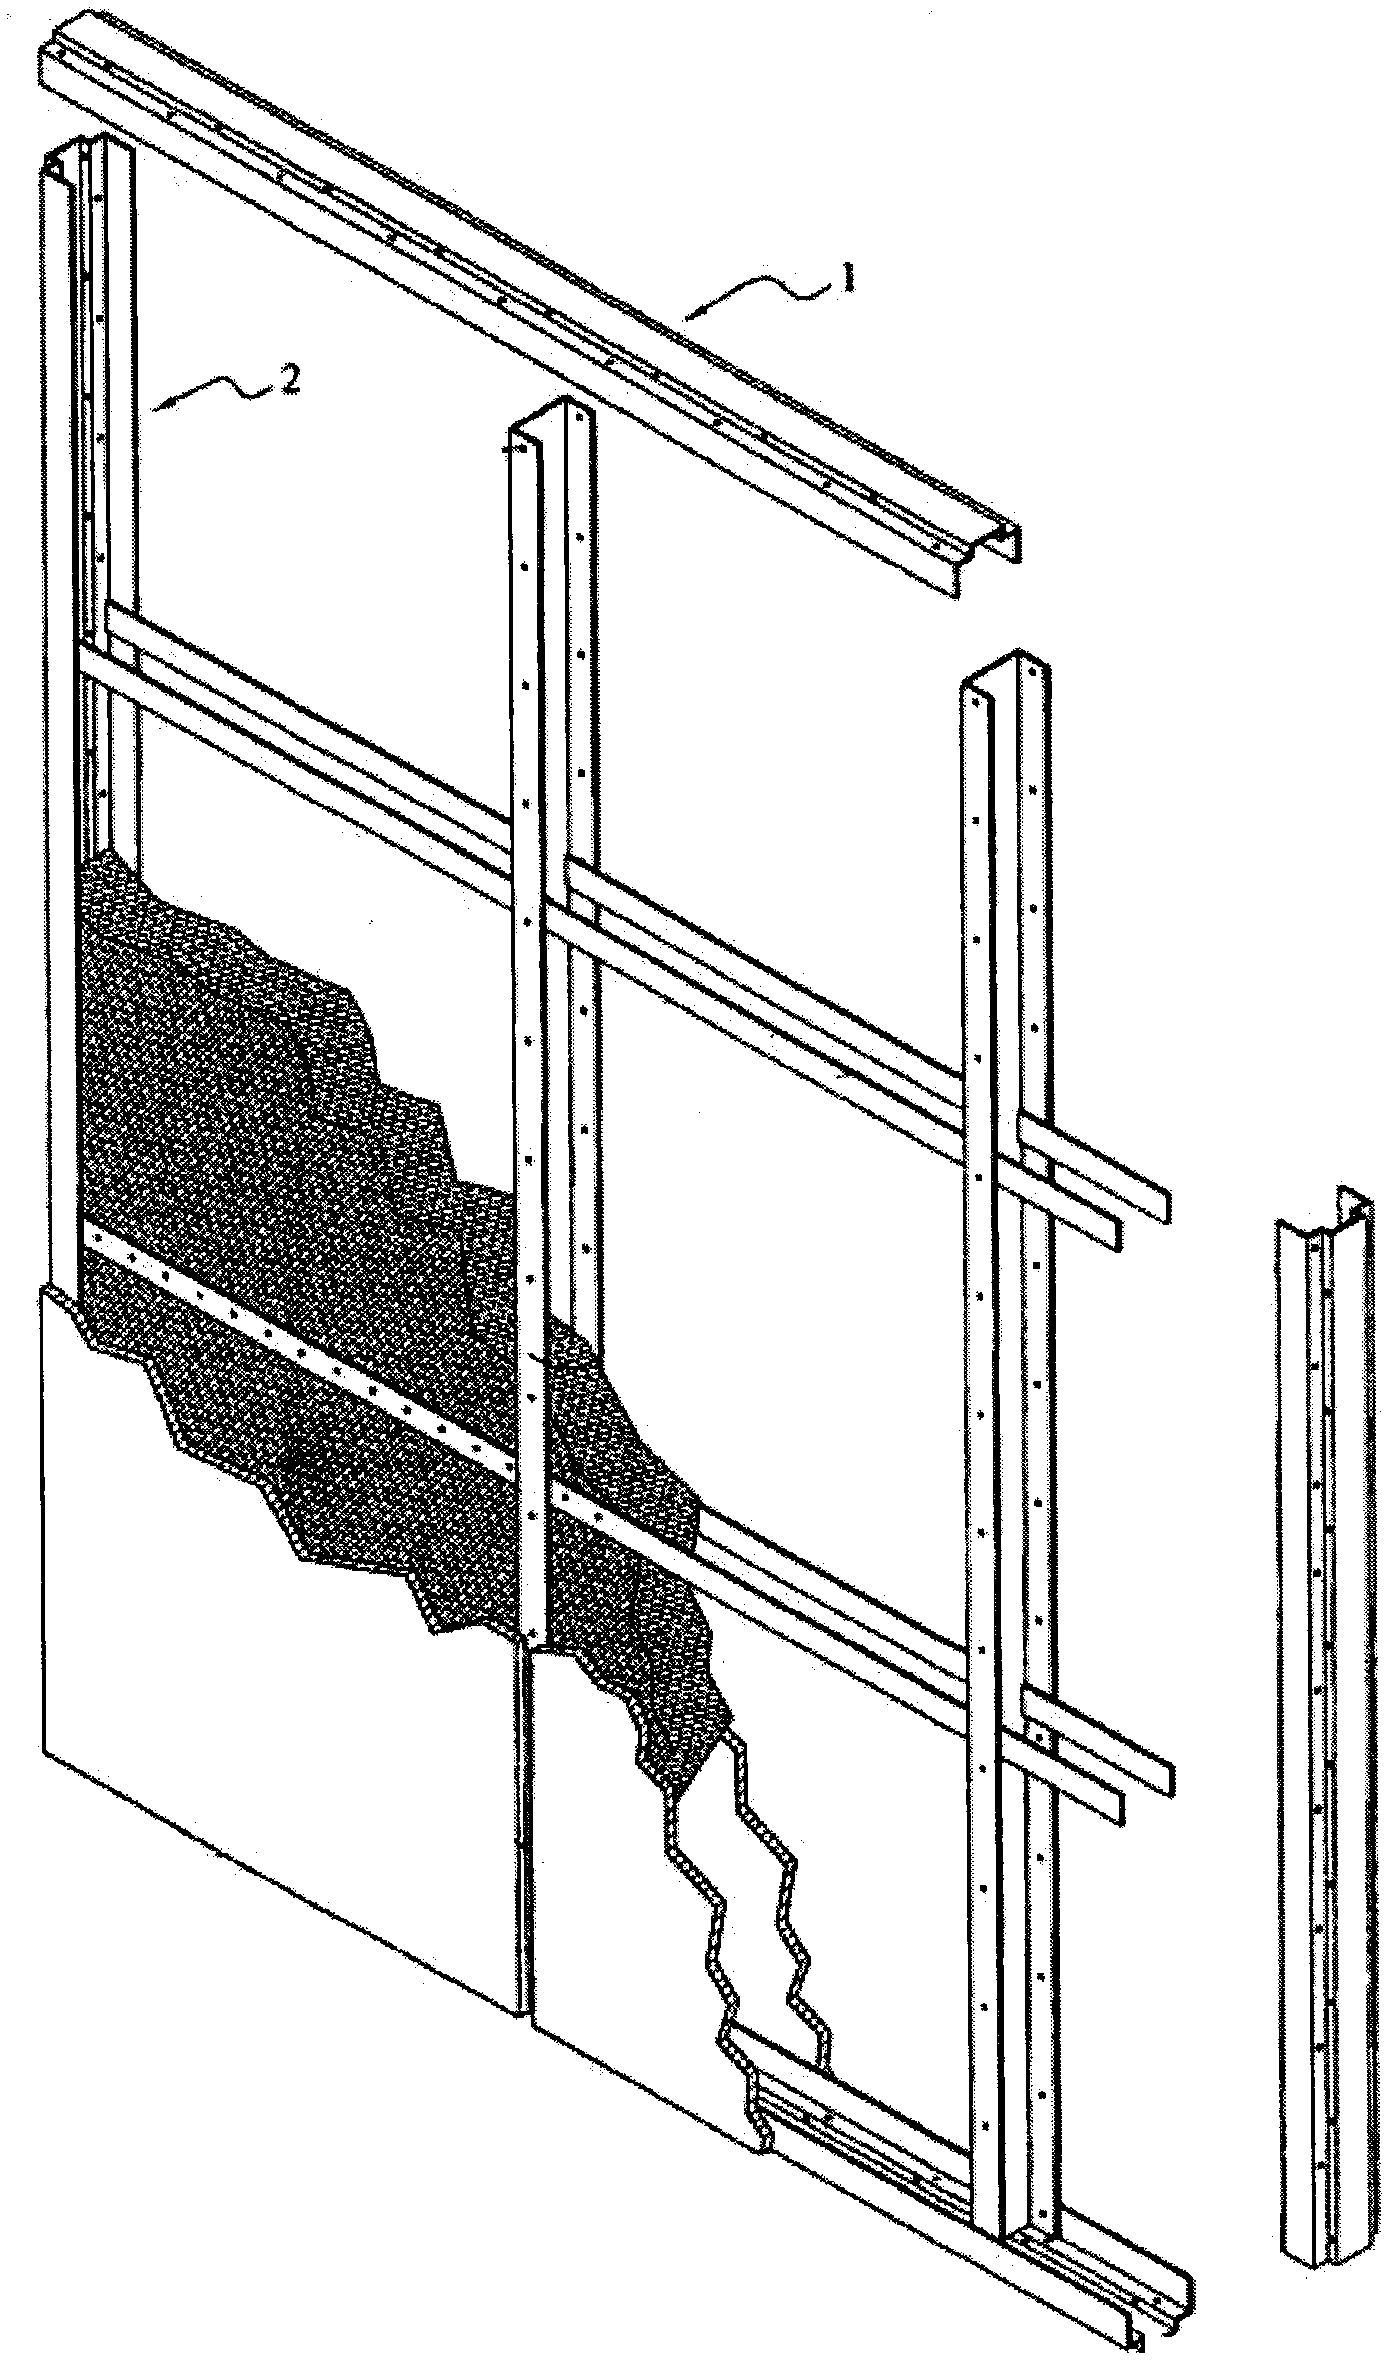 Connecting piece for partition walls